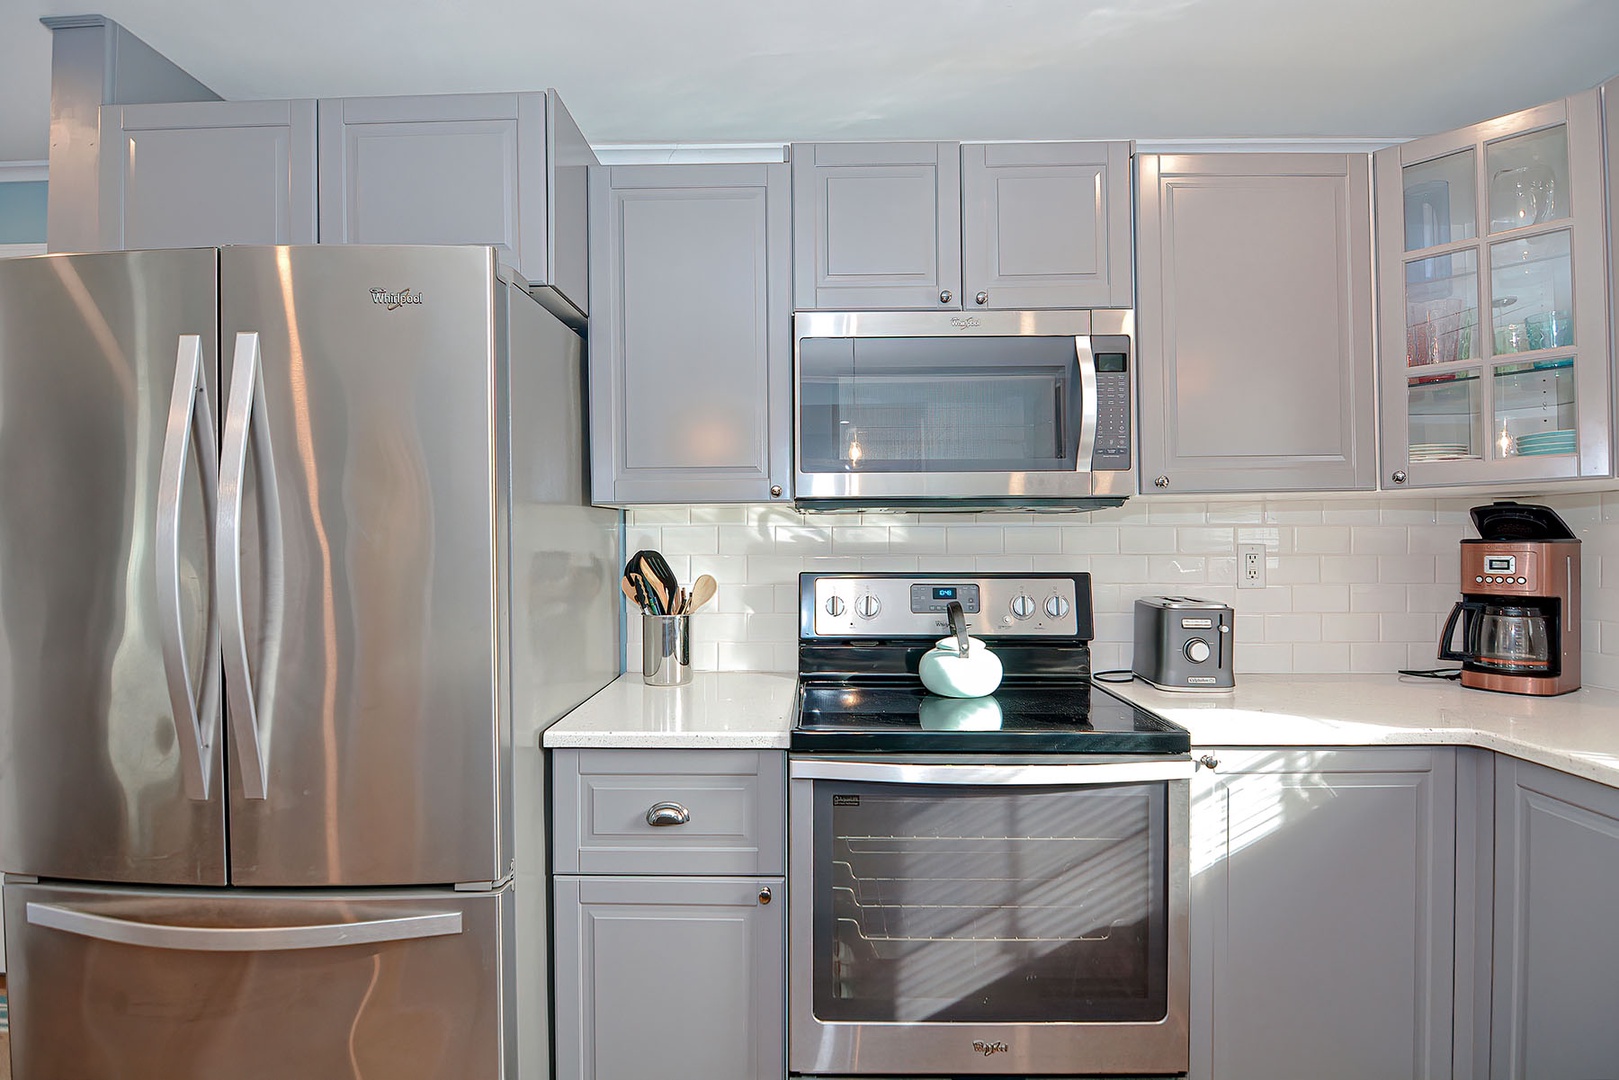 The renovated kitchen is well-equipped with appliances.